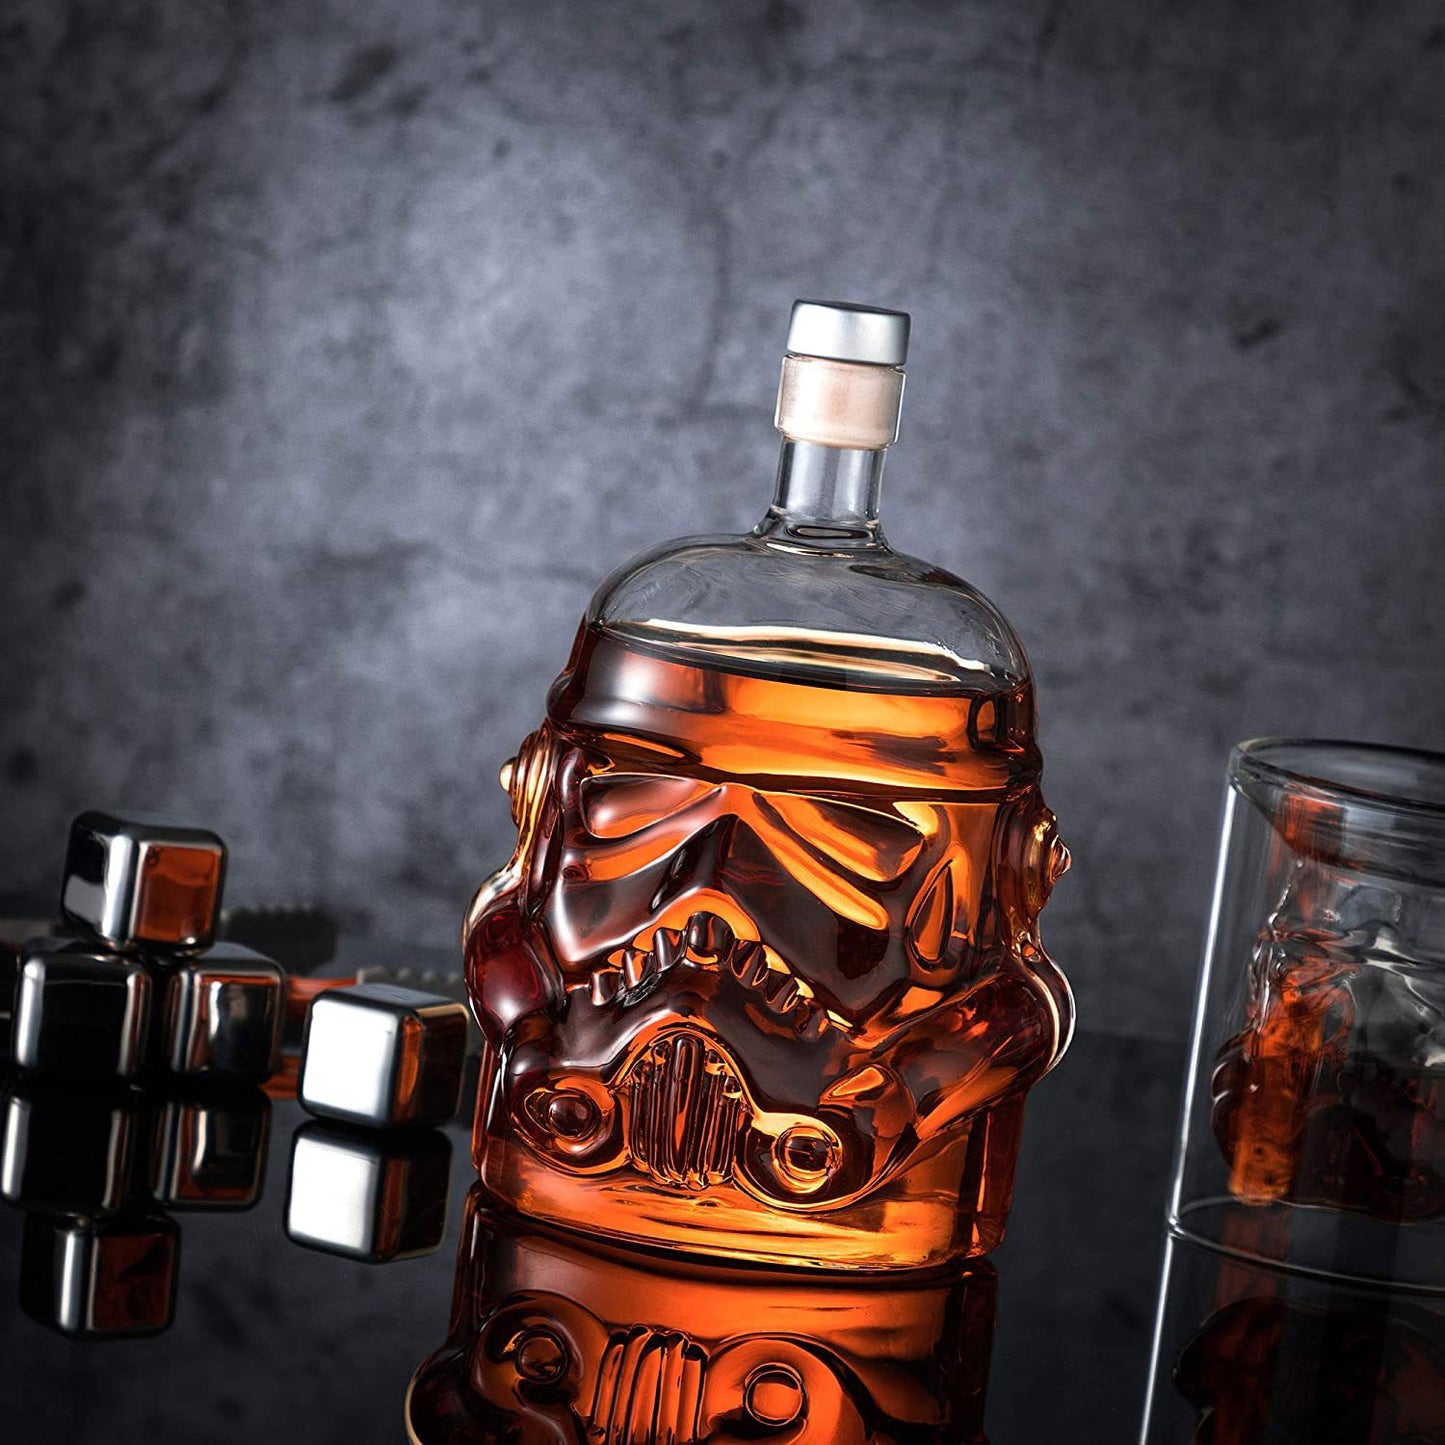 Glasscias's Star Wars-themed whiskey decanters